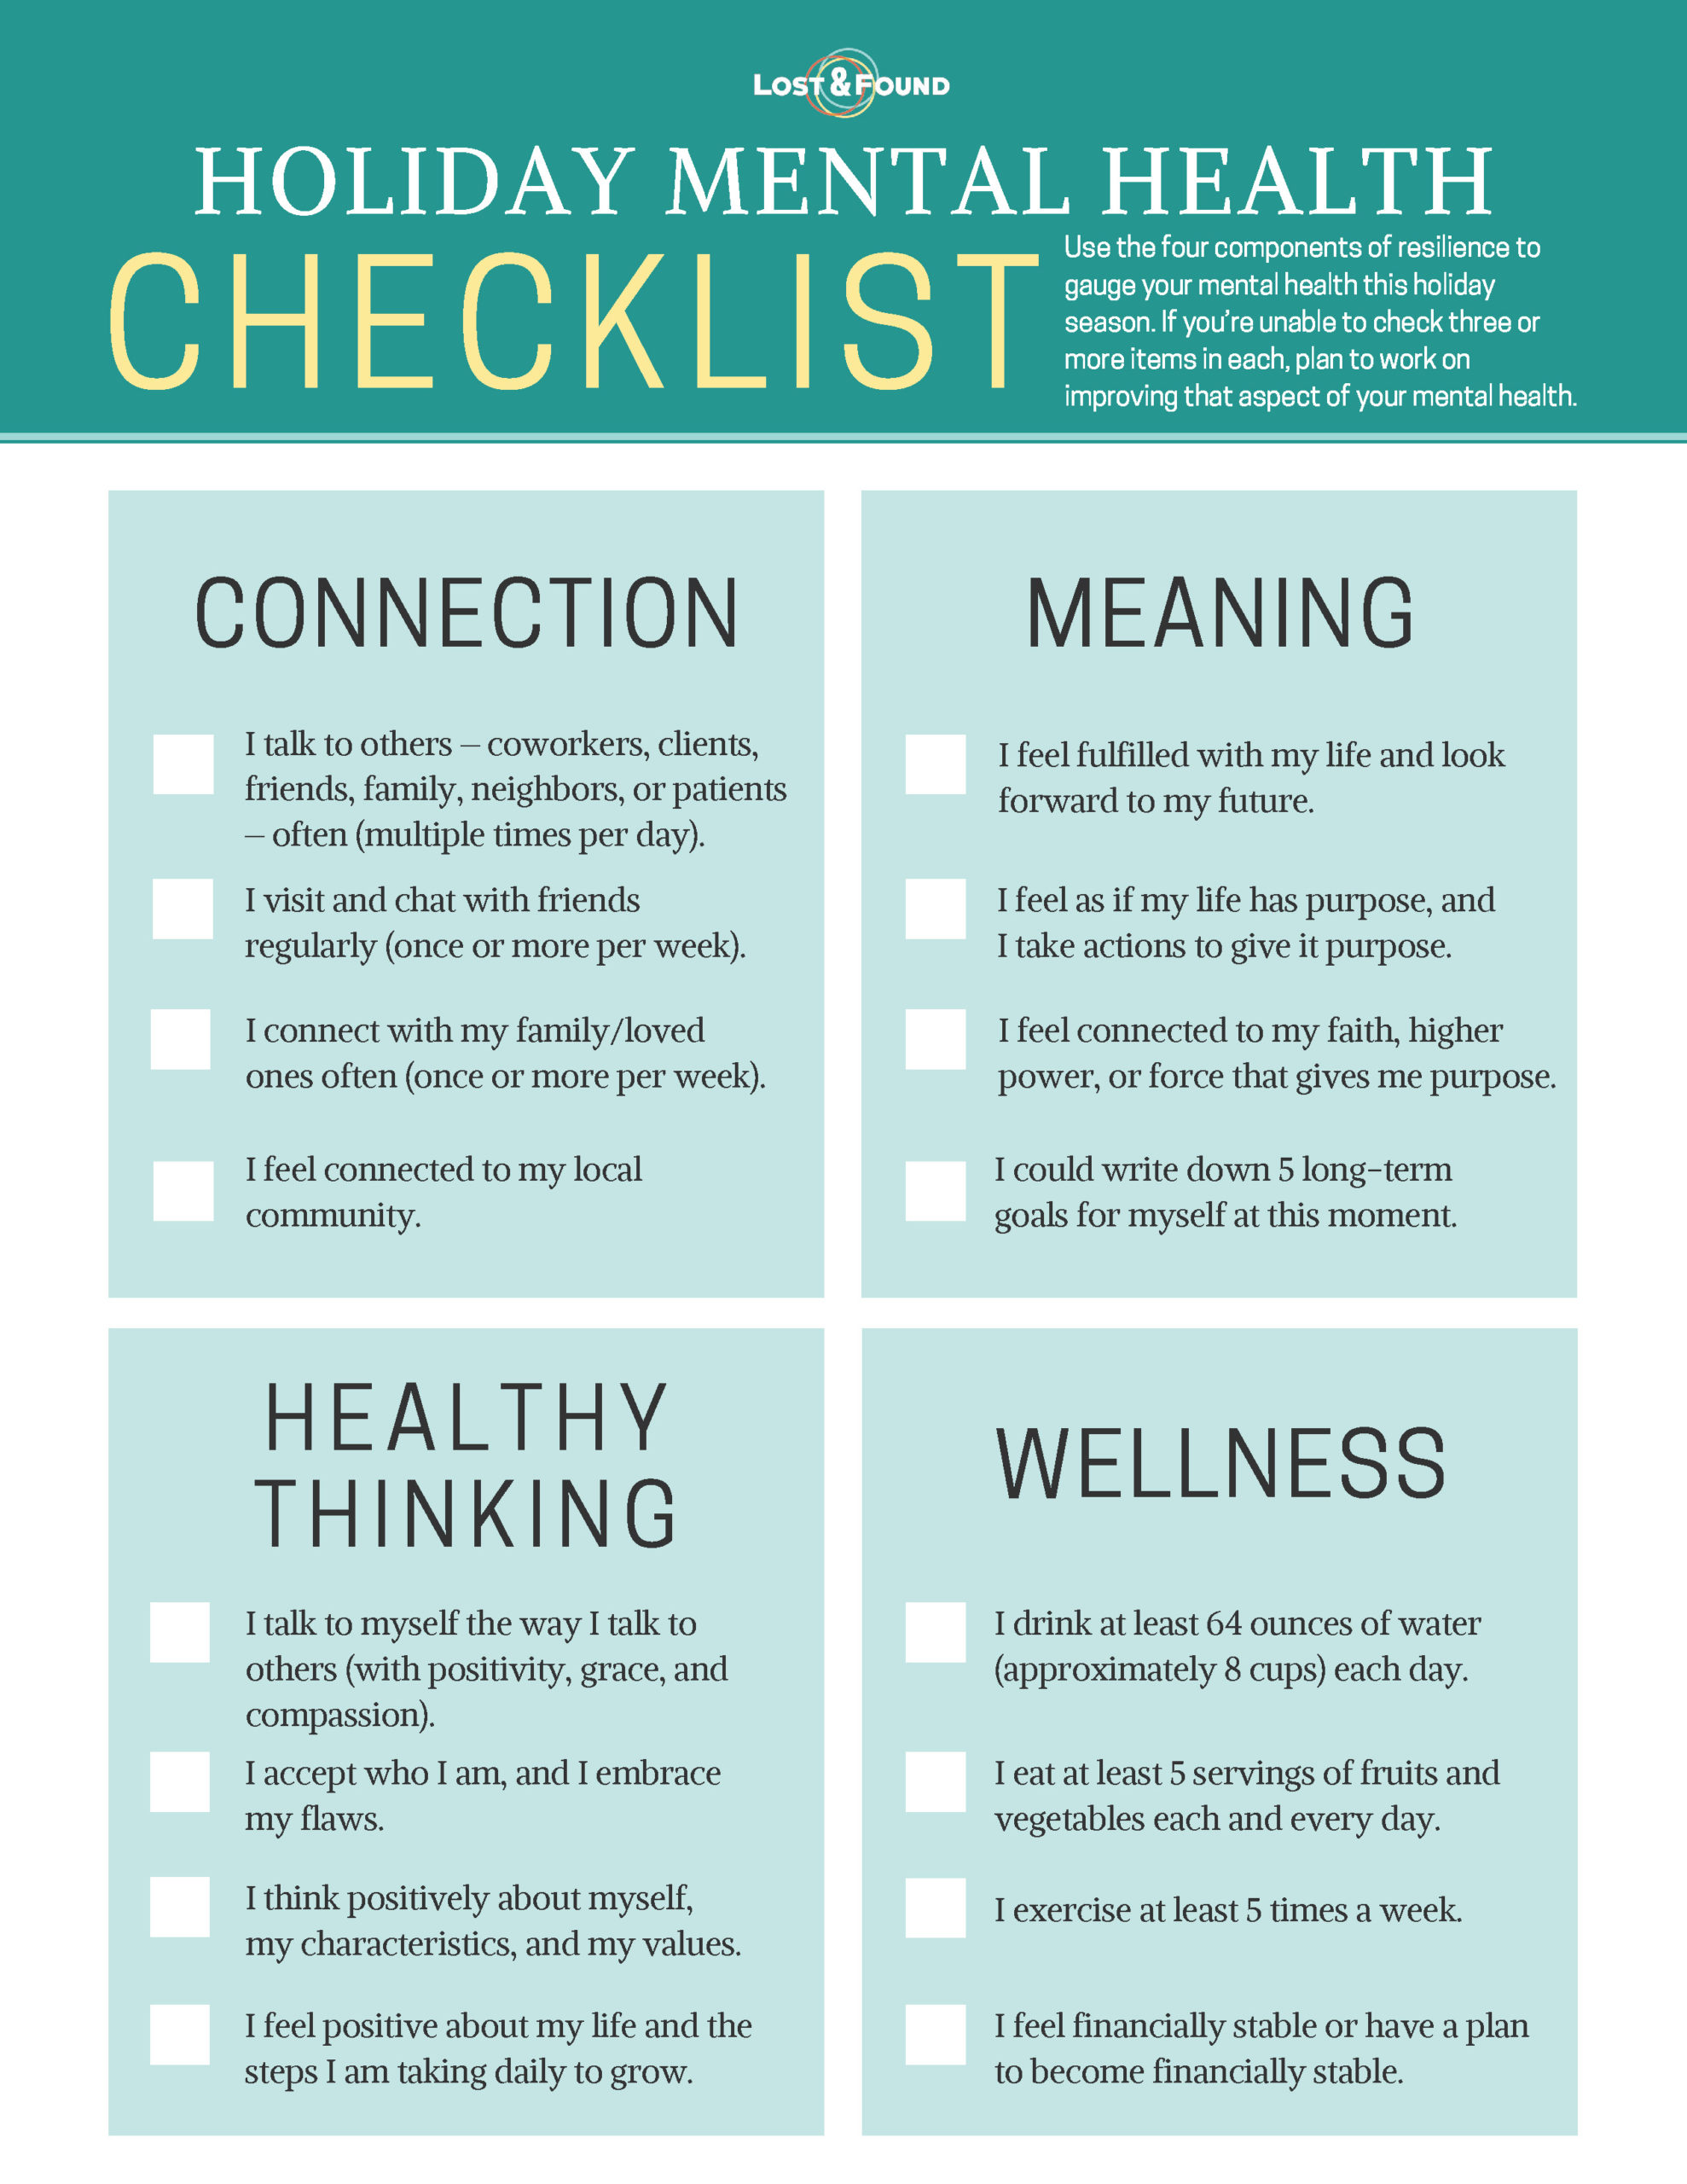 start-your-holiday-mental-health-plan-with-this-checklist-lost-found